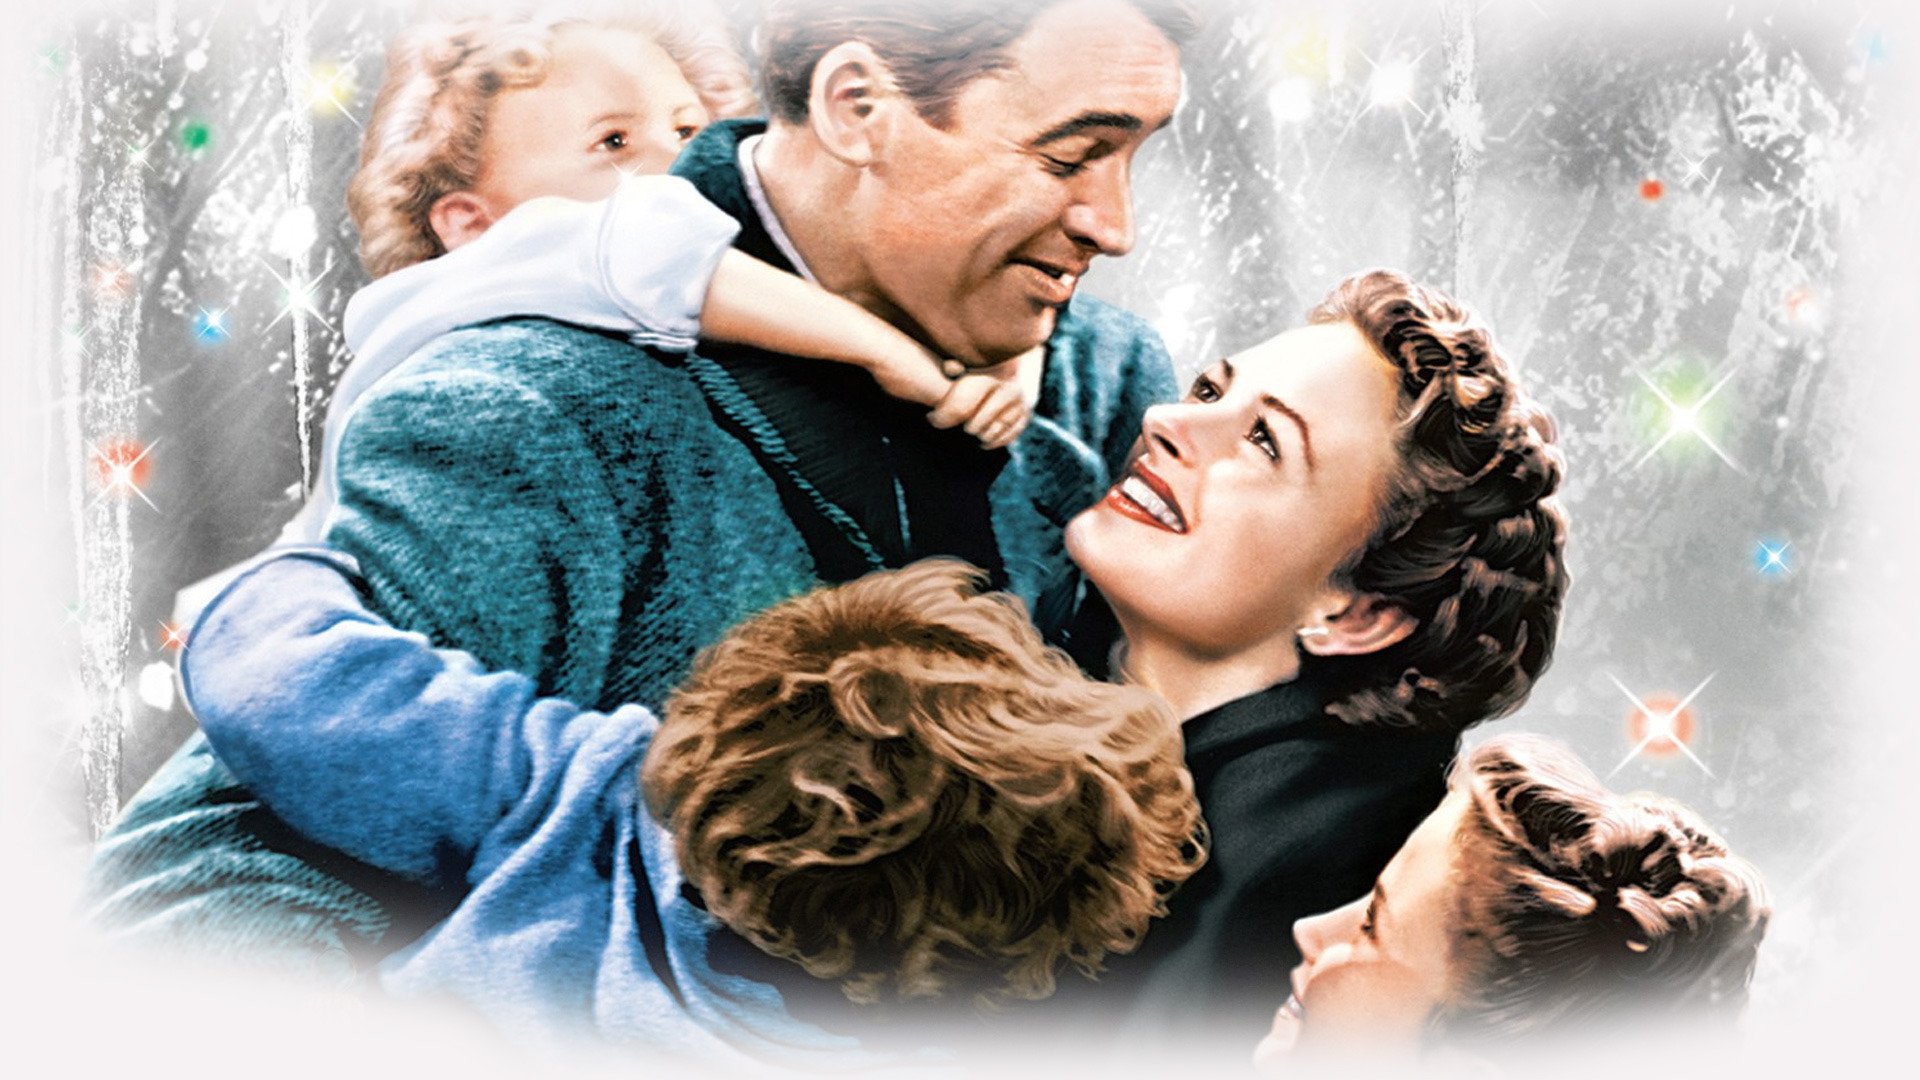 It's A Wonderful Life 4K Review